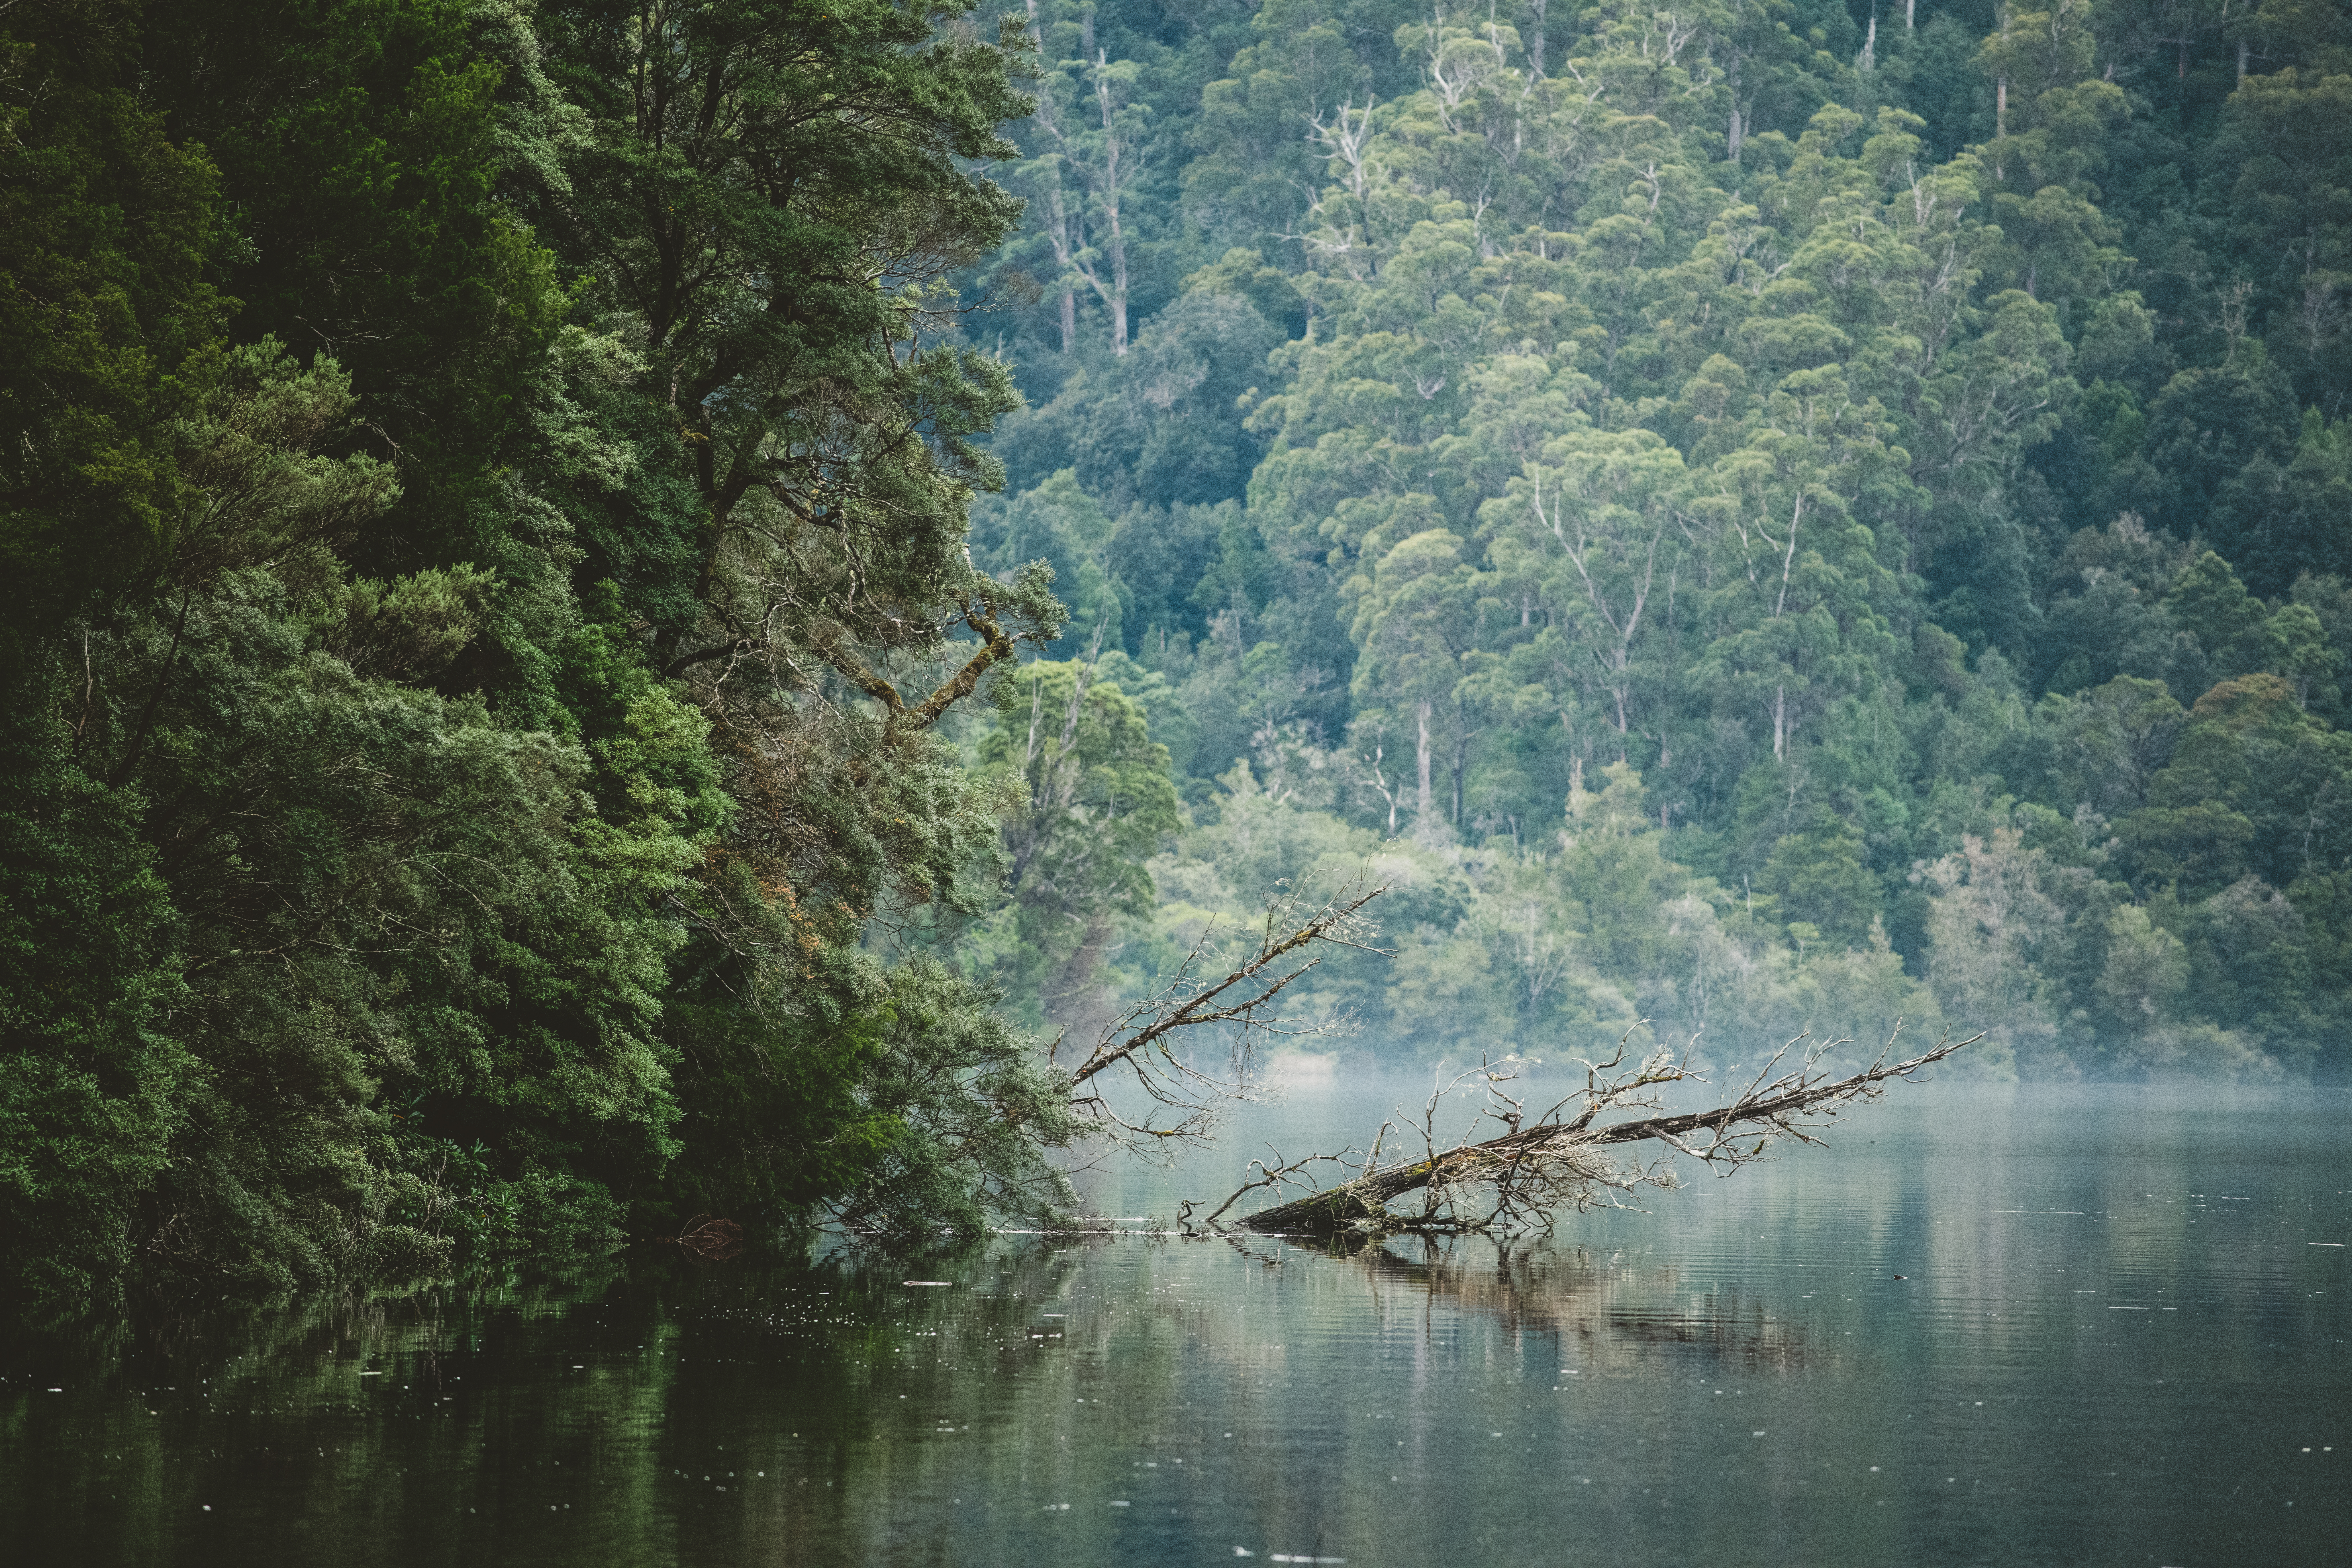 Huon pine surrounds Pieman River, with trees in the water.